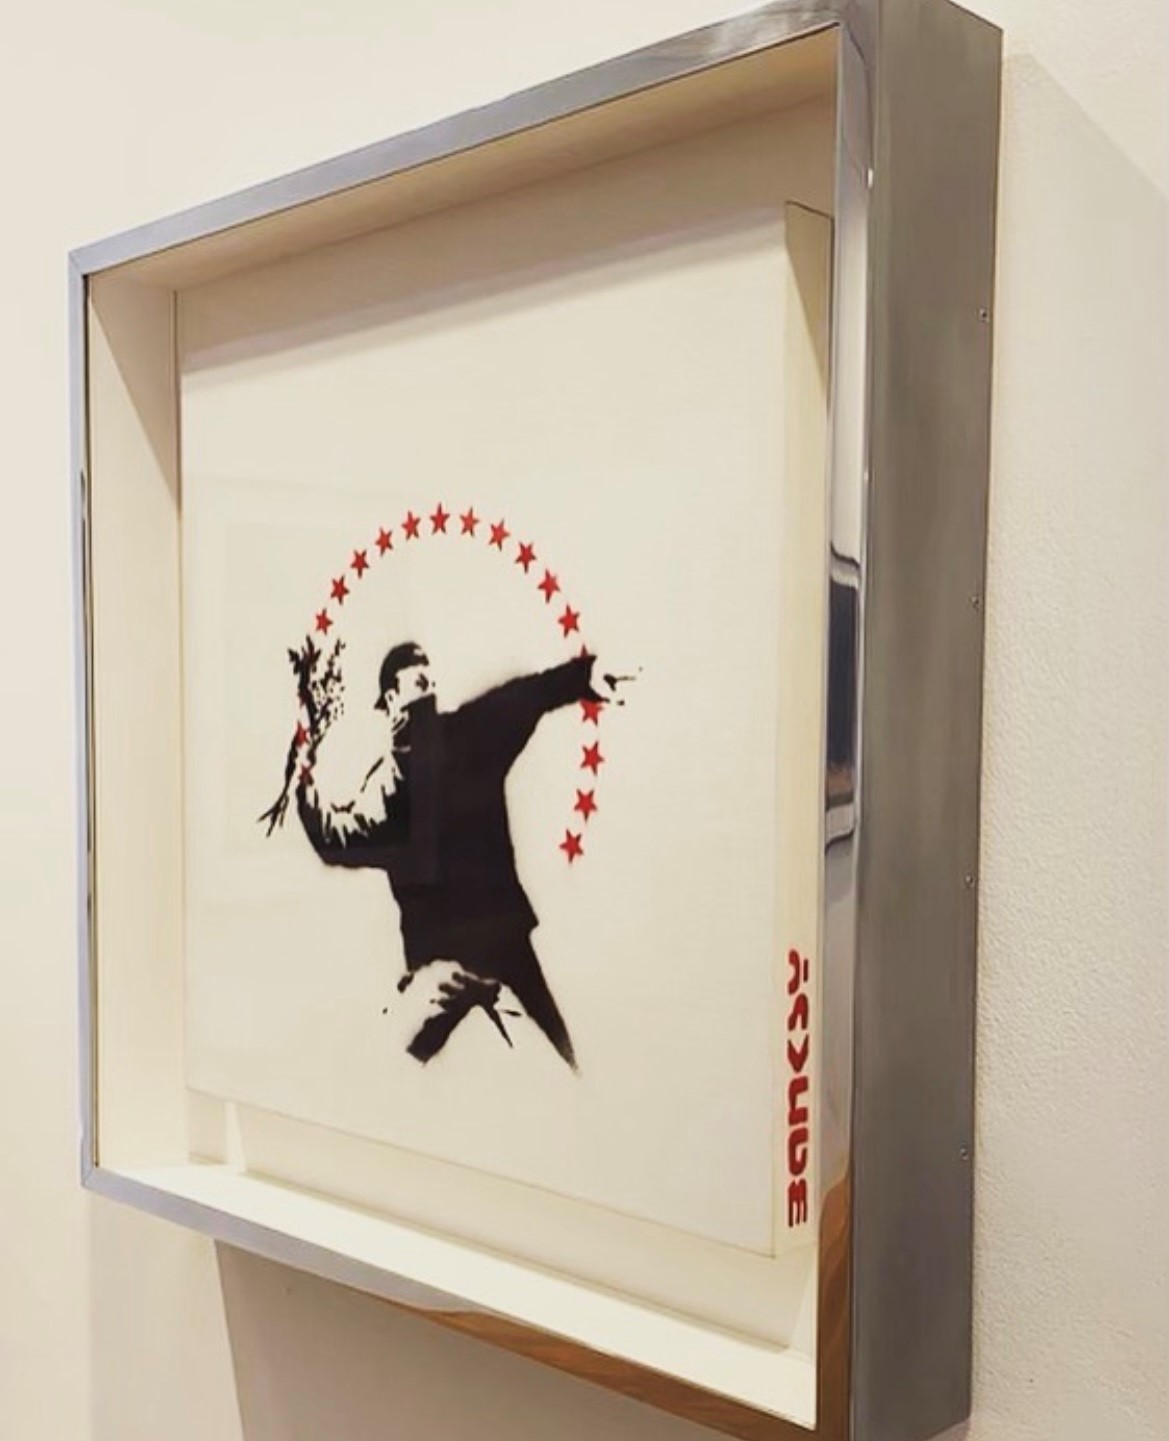 There are many ways to frame a Banksy thumbnail